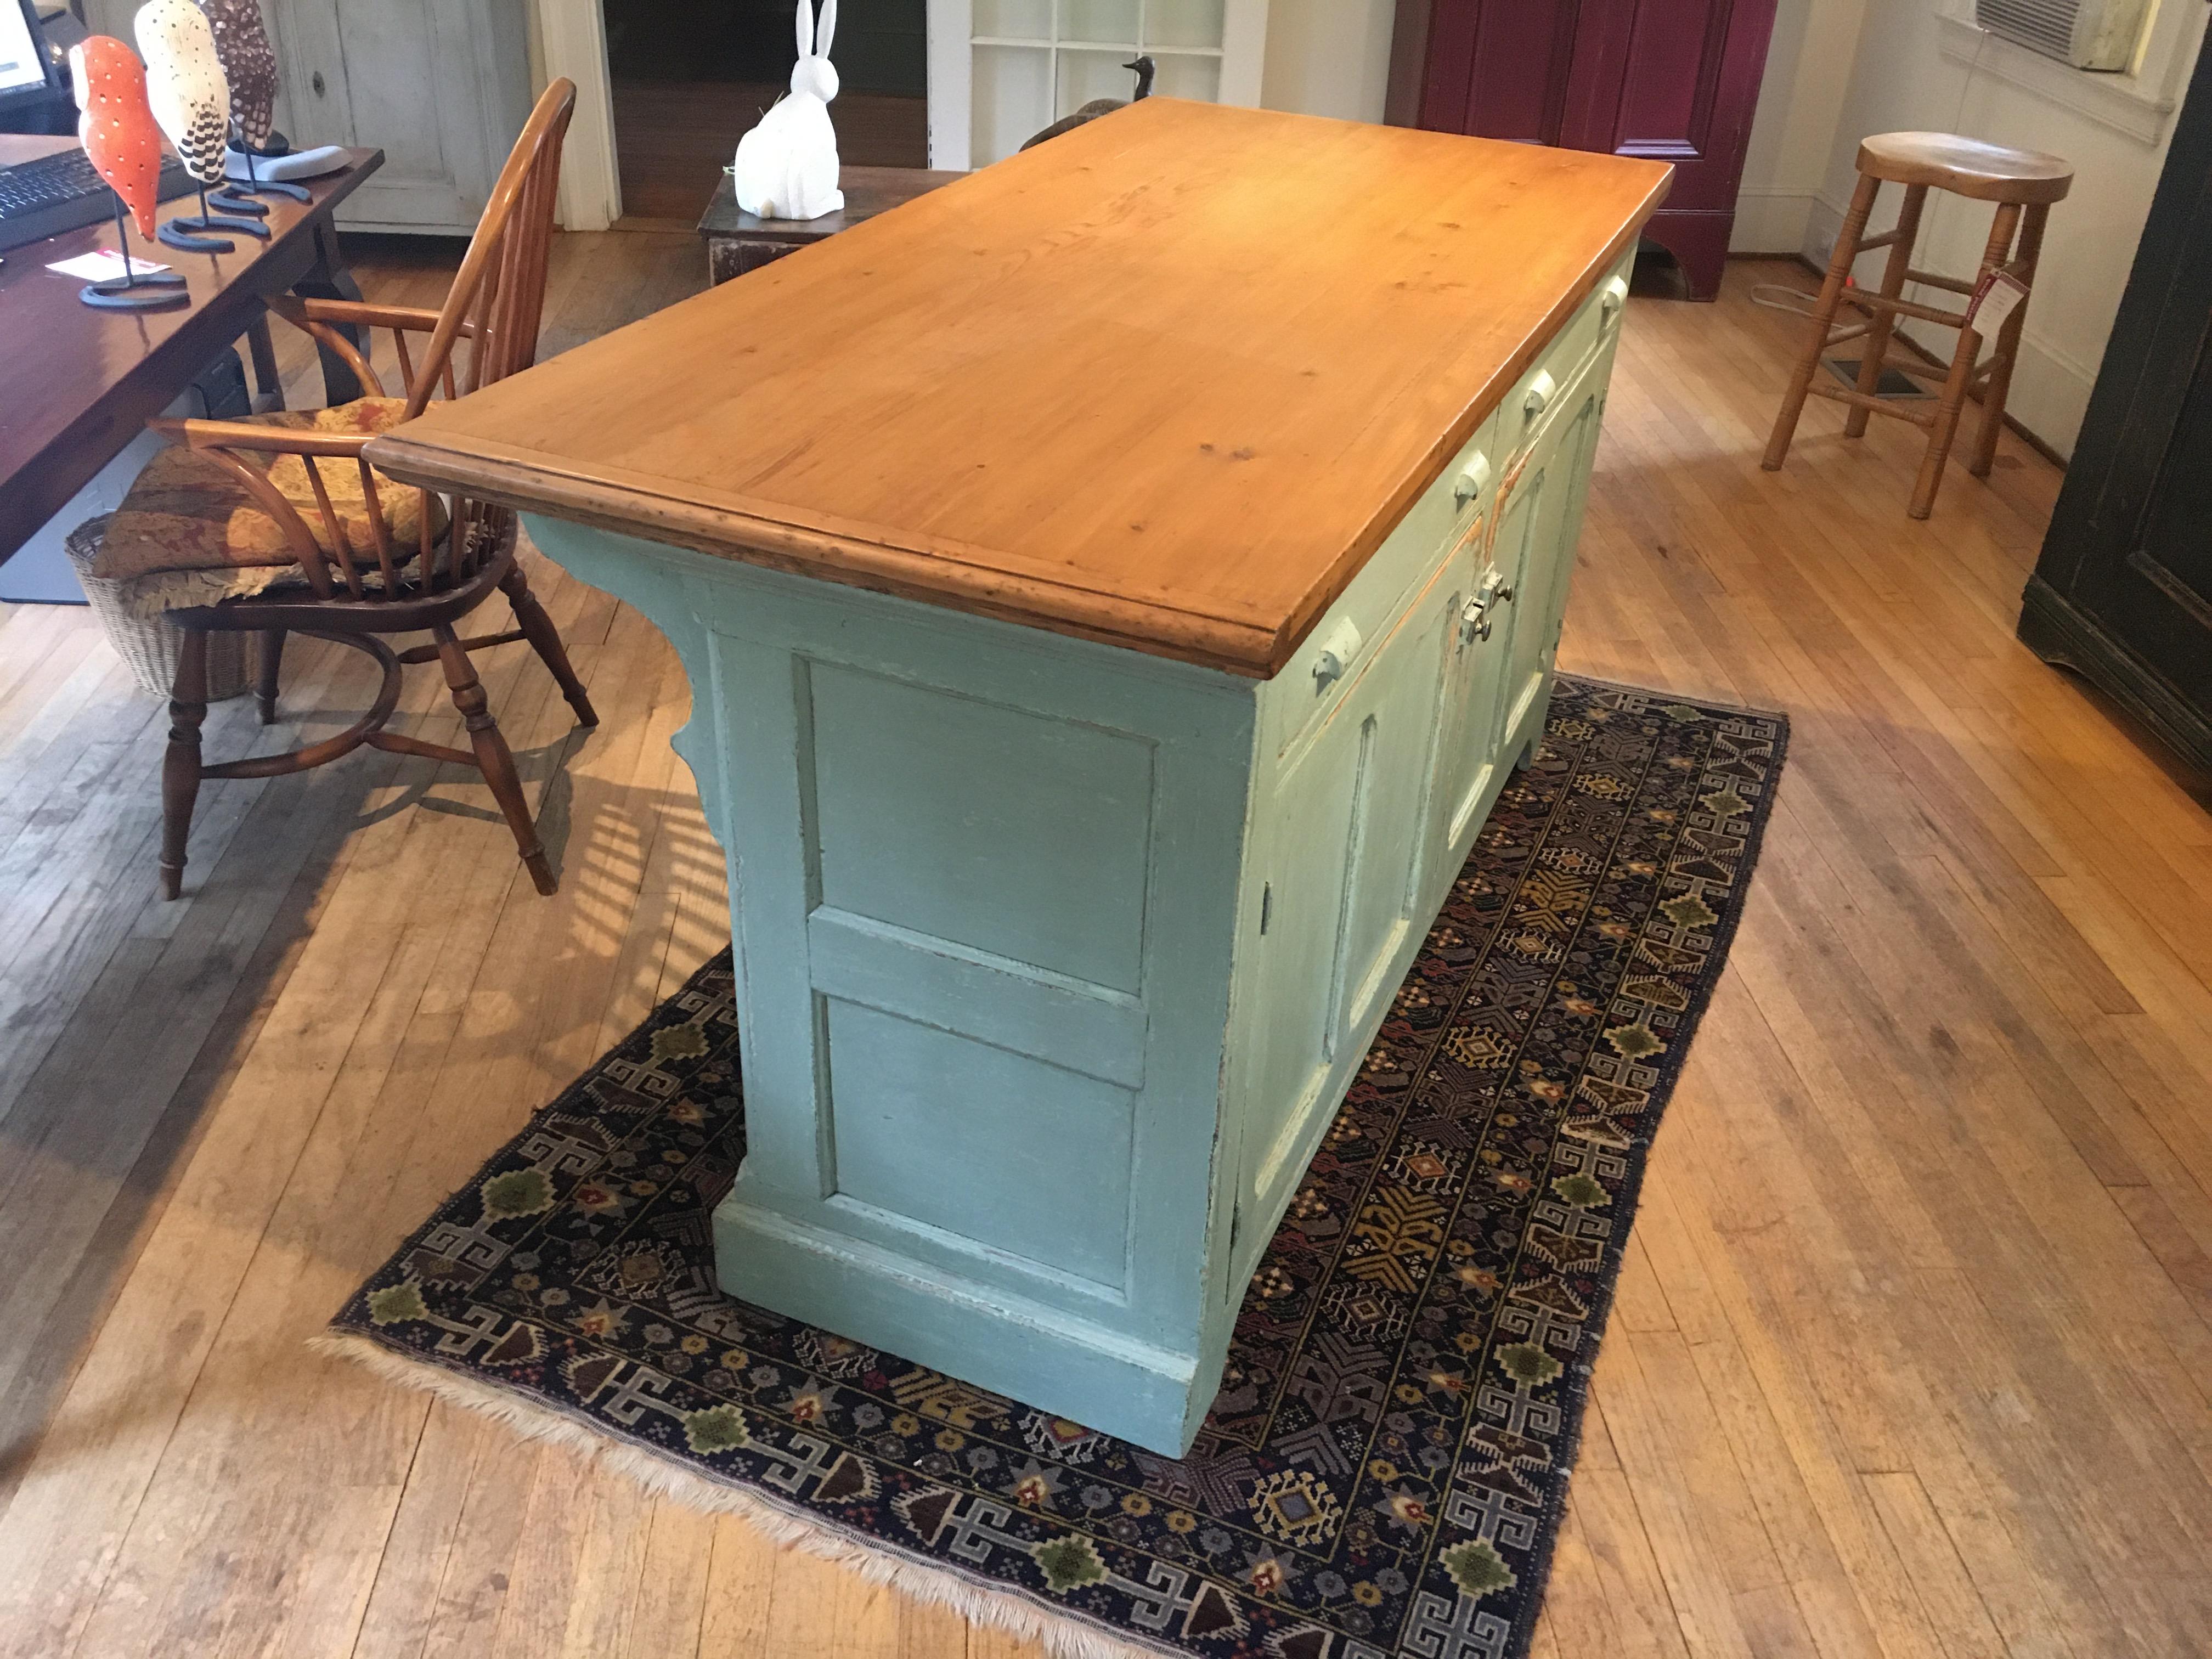 Pine, circa reproduction, this is one of many store counters designed by well known Quebec City architect. Our dealer outside Quebec City uses entirely old wood and hardware to make a perfectly-proportioned center island for a kitchen. The generous